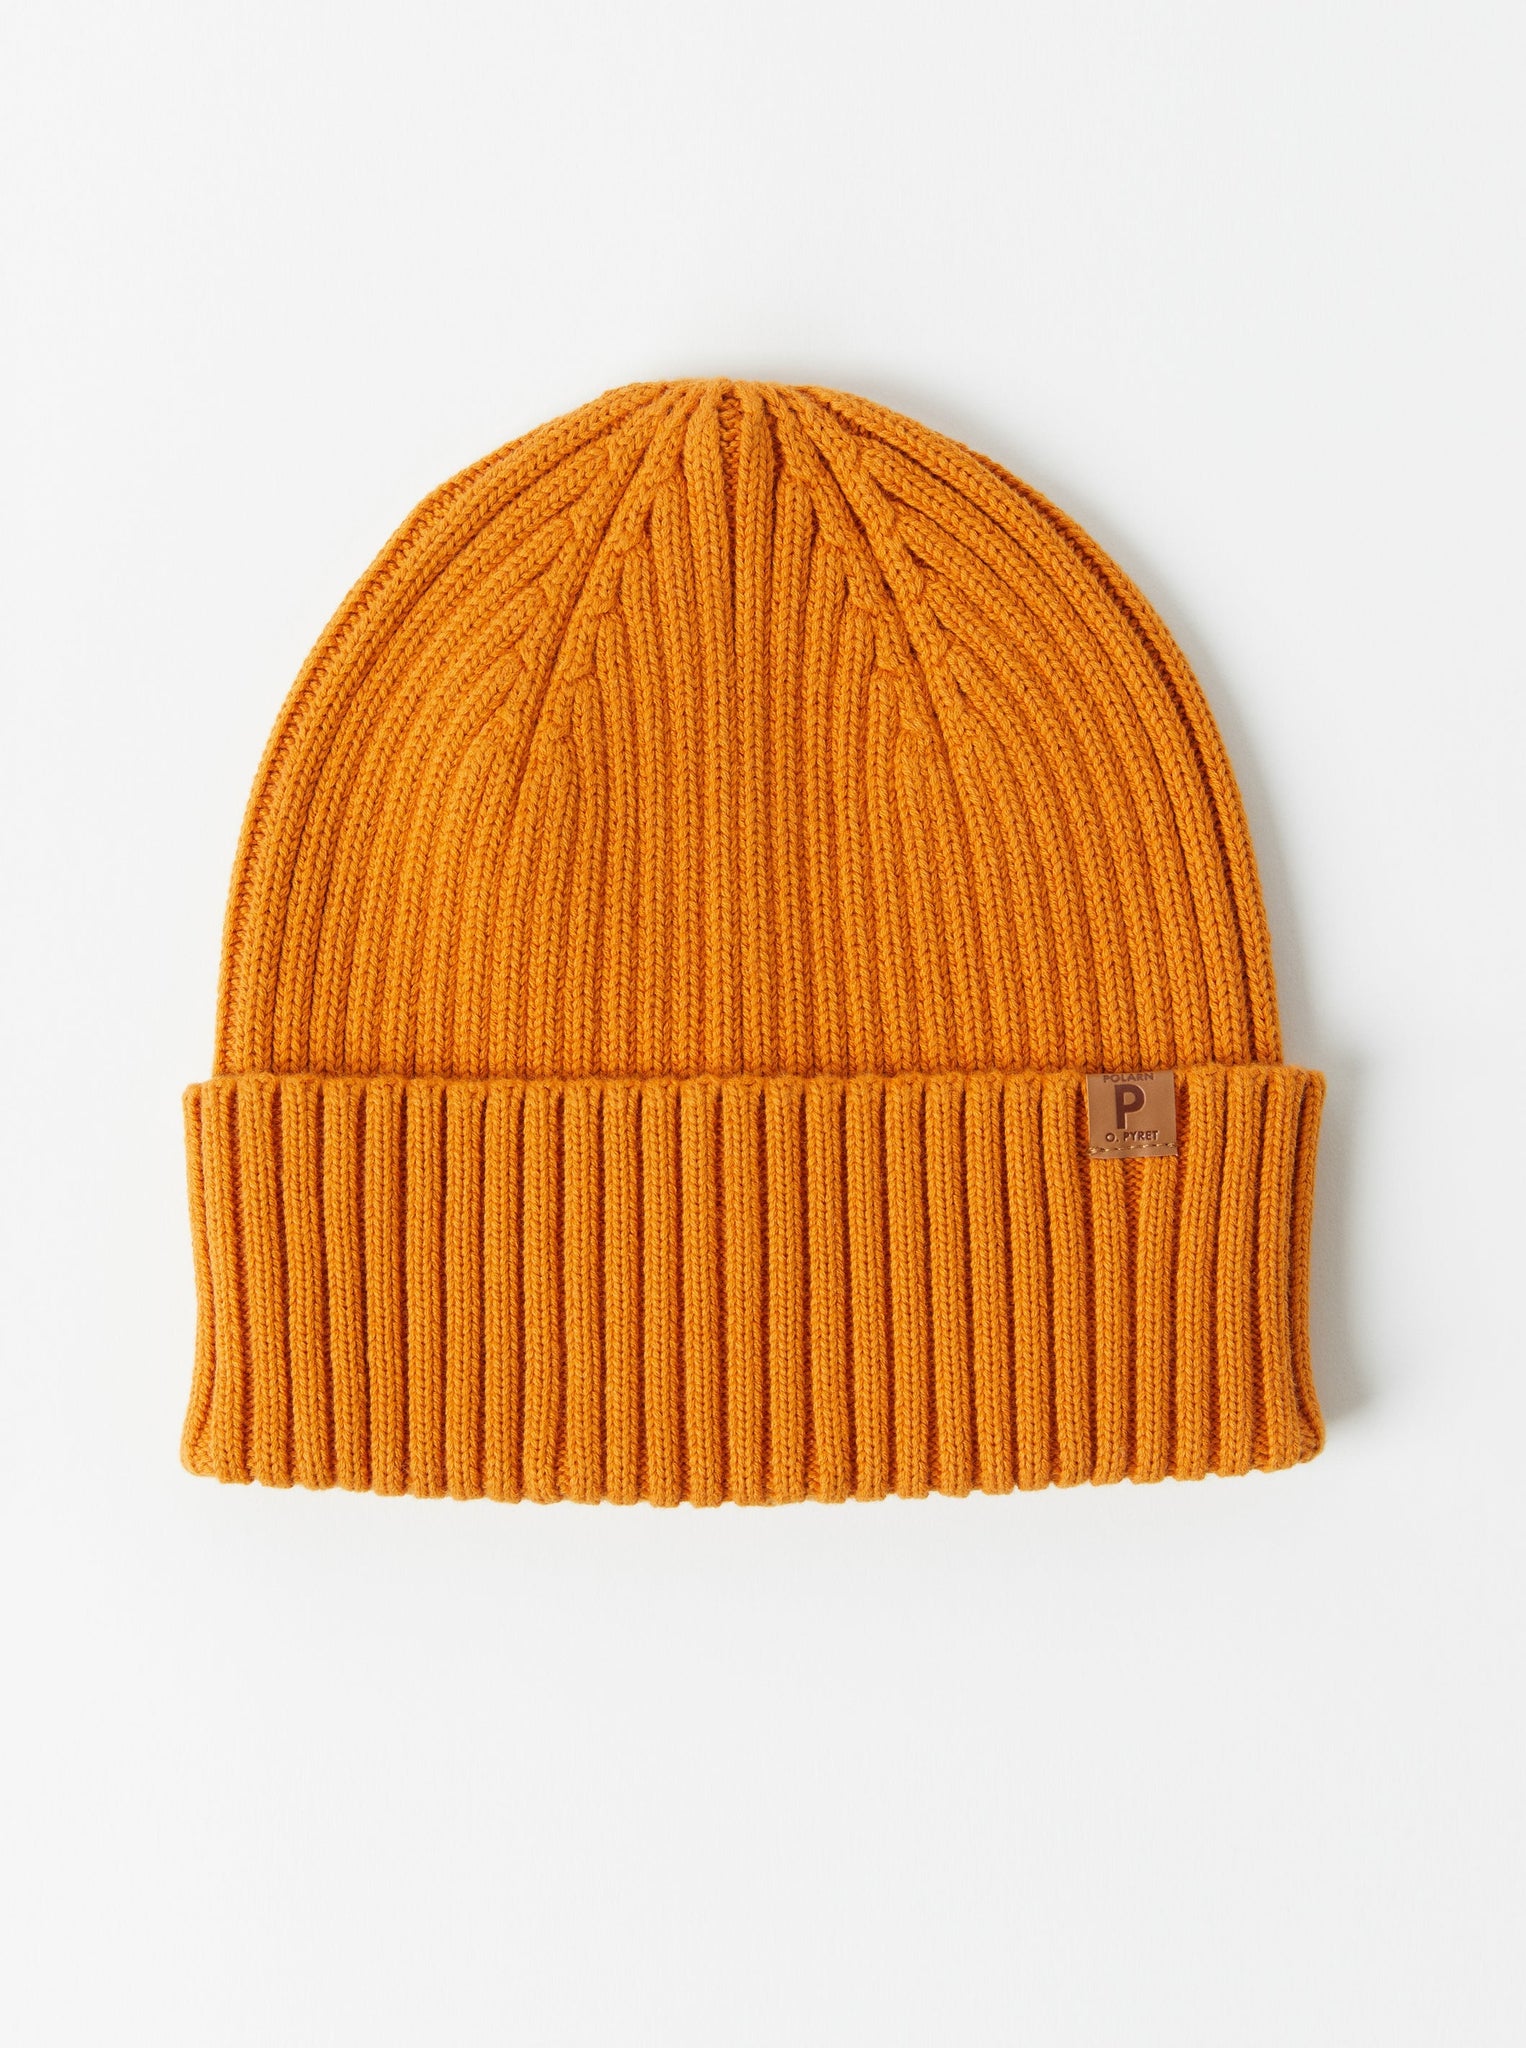 Yellow Kids Knitted Hat from the Polarn O. Pyret kidswear collection. Ethically produced kids outerwear.